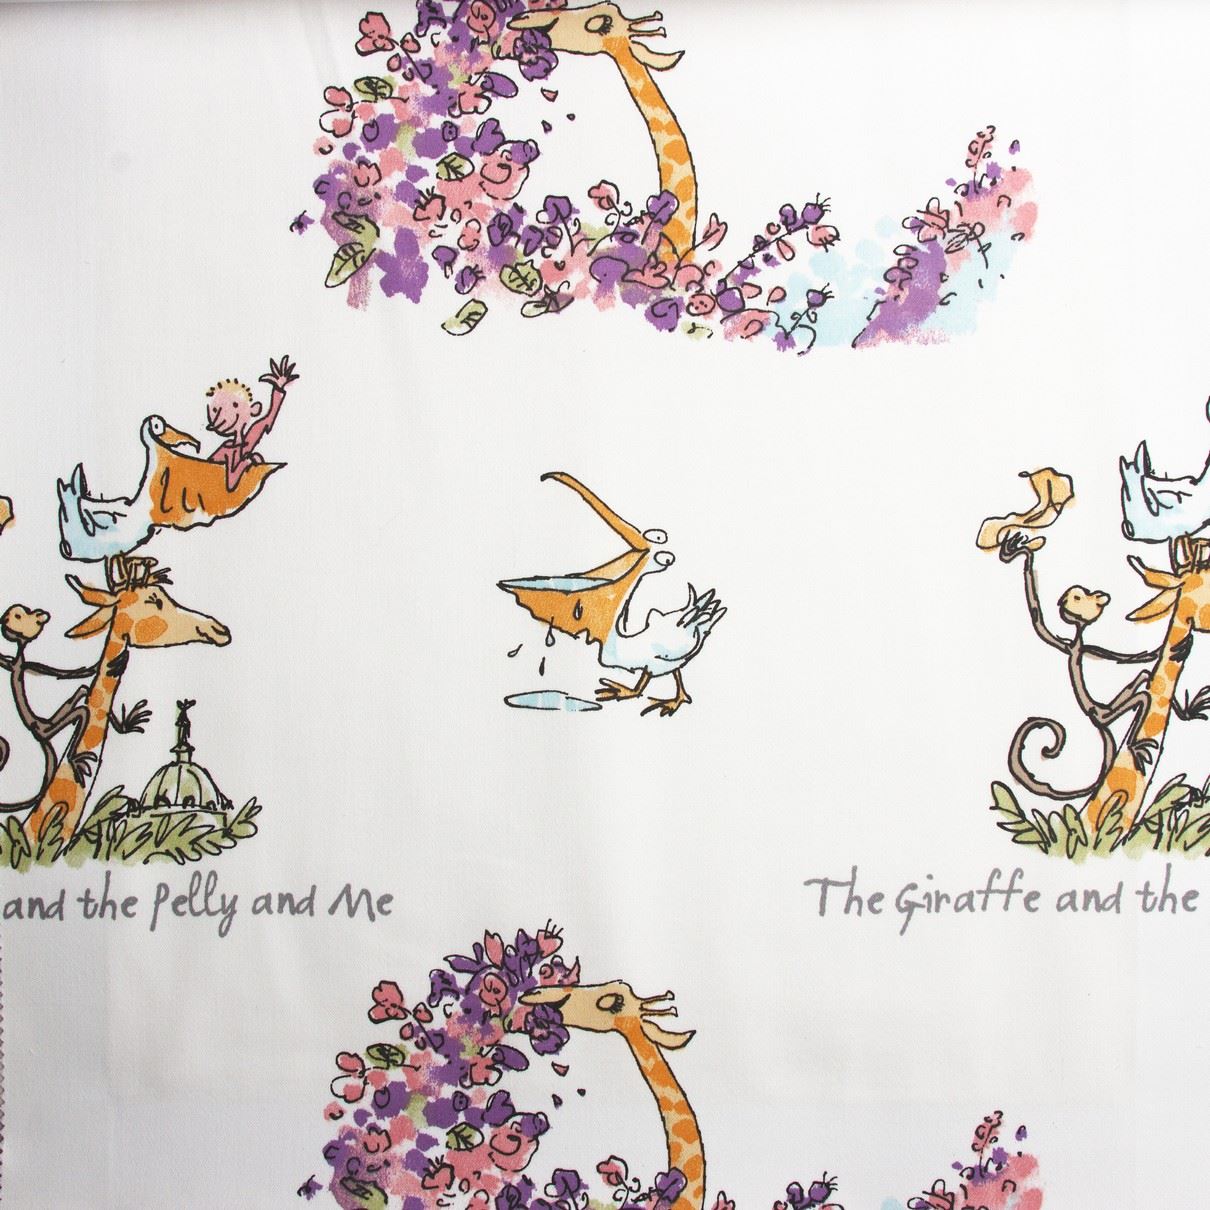 Roald Dahl Quentin Blake Art Story Quilting Curtain - Giraffe And The Pelly And Me Illustrations - HD Wallpaper 